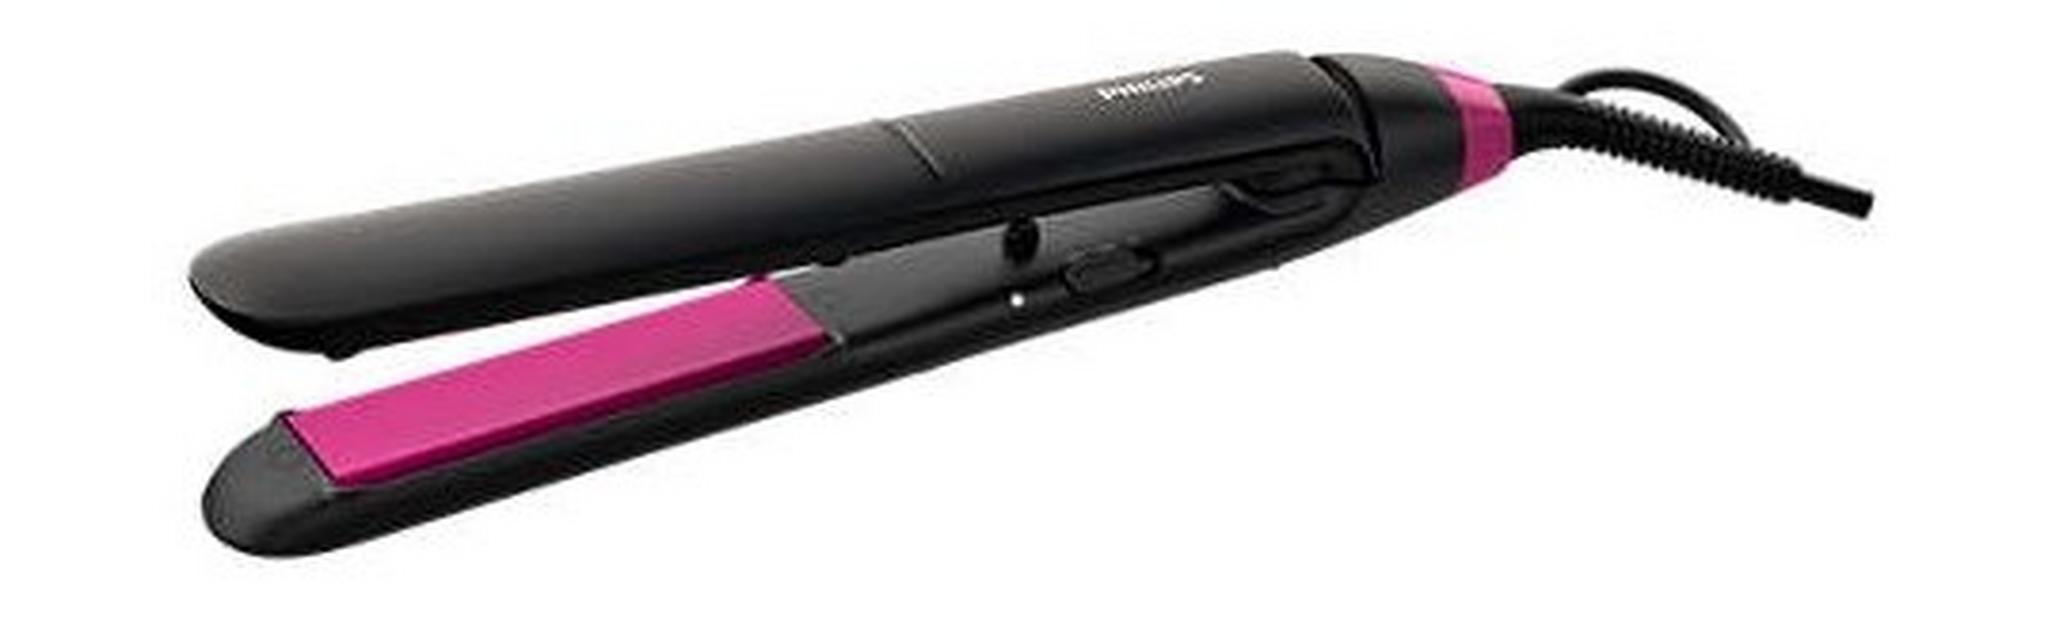 Philips ThermoProtect  Hair Straightener - (BHS375/03)